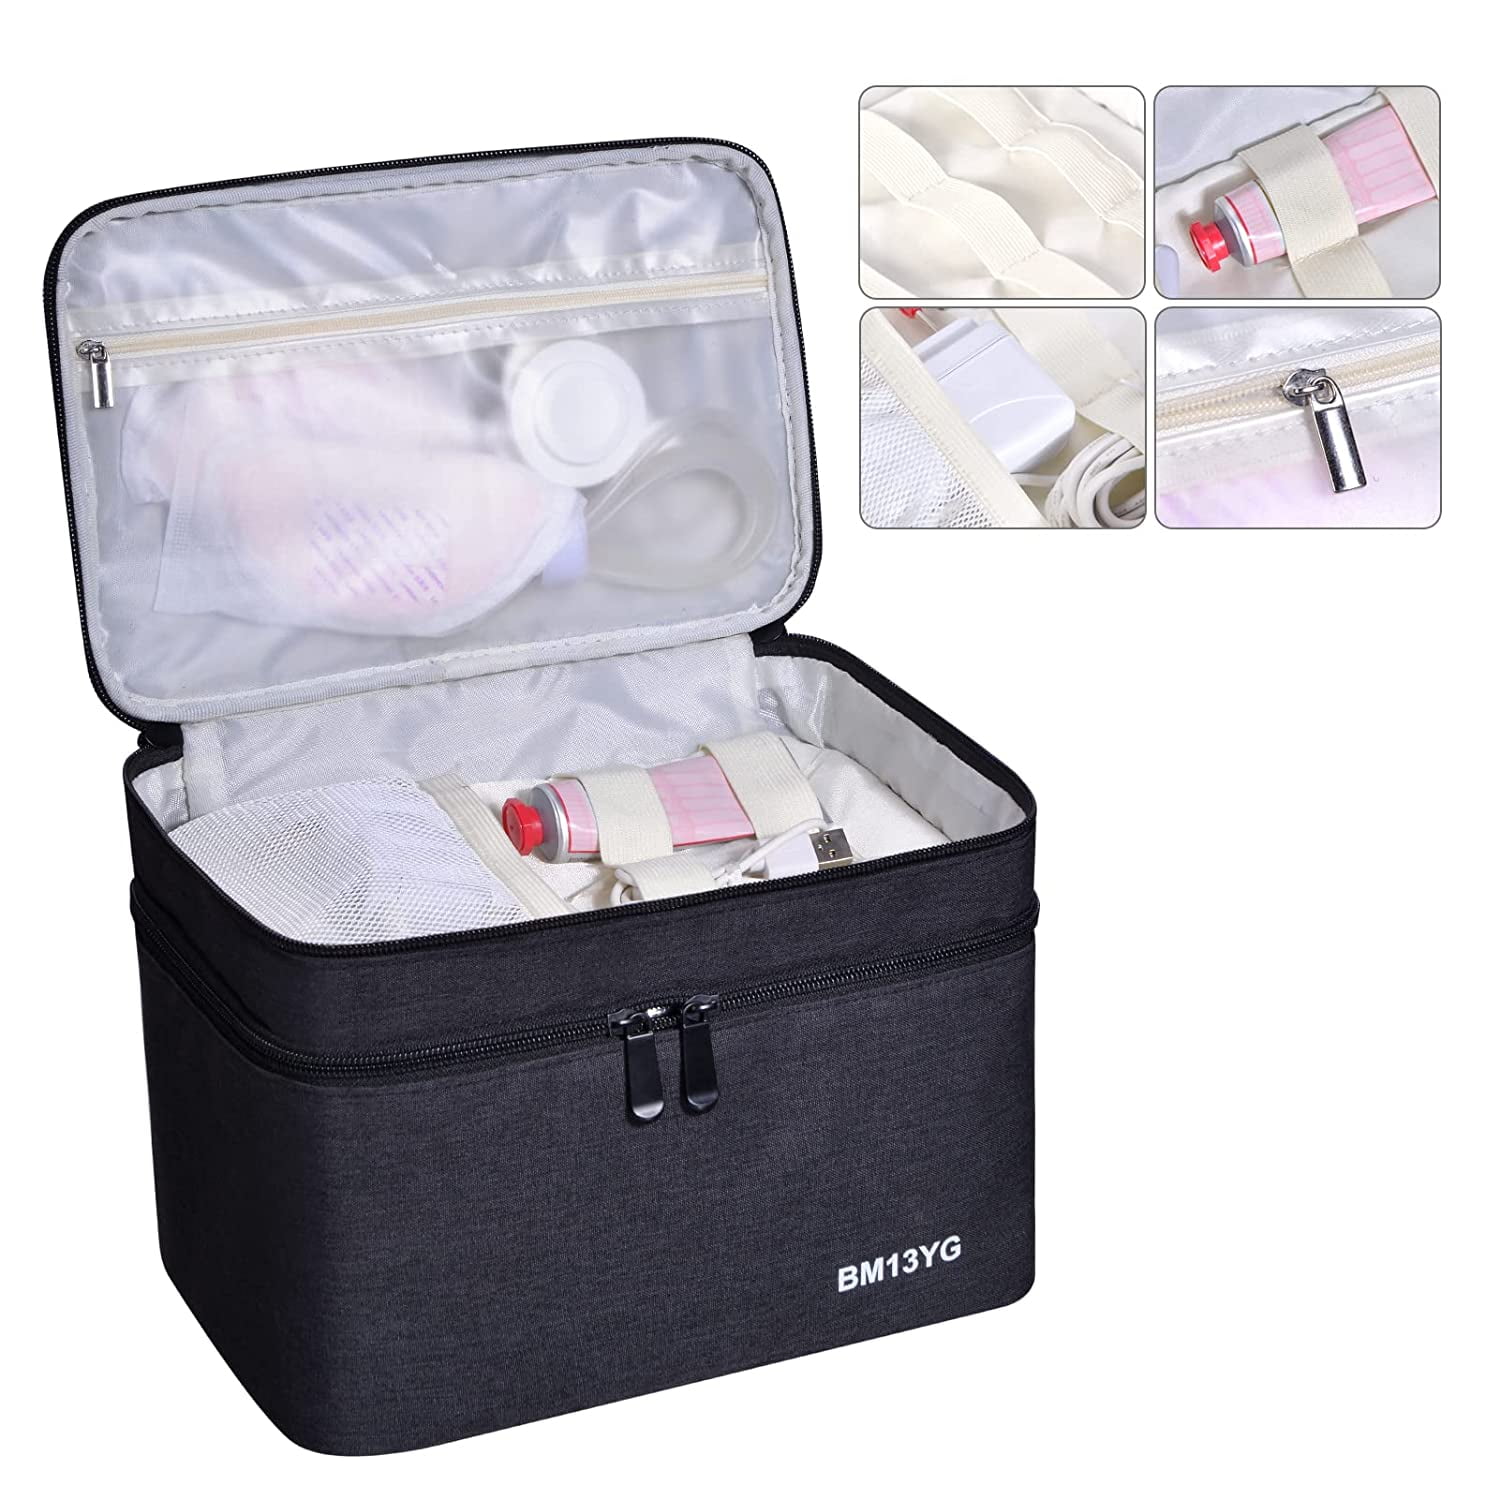 Momcozy Breast Pump Bag for Hands-Free Wearable Breast Pumps, Hard Shell  Case with Removable Tray, Watertight Breast Pump Storage Bag for Pumping  Bag